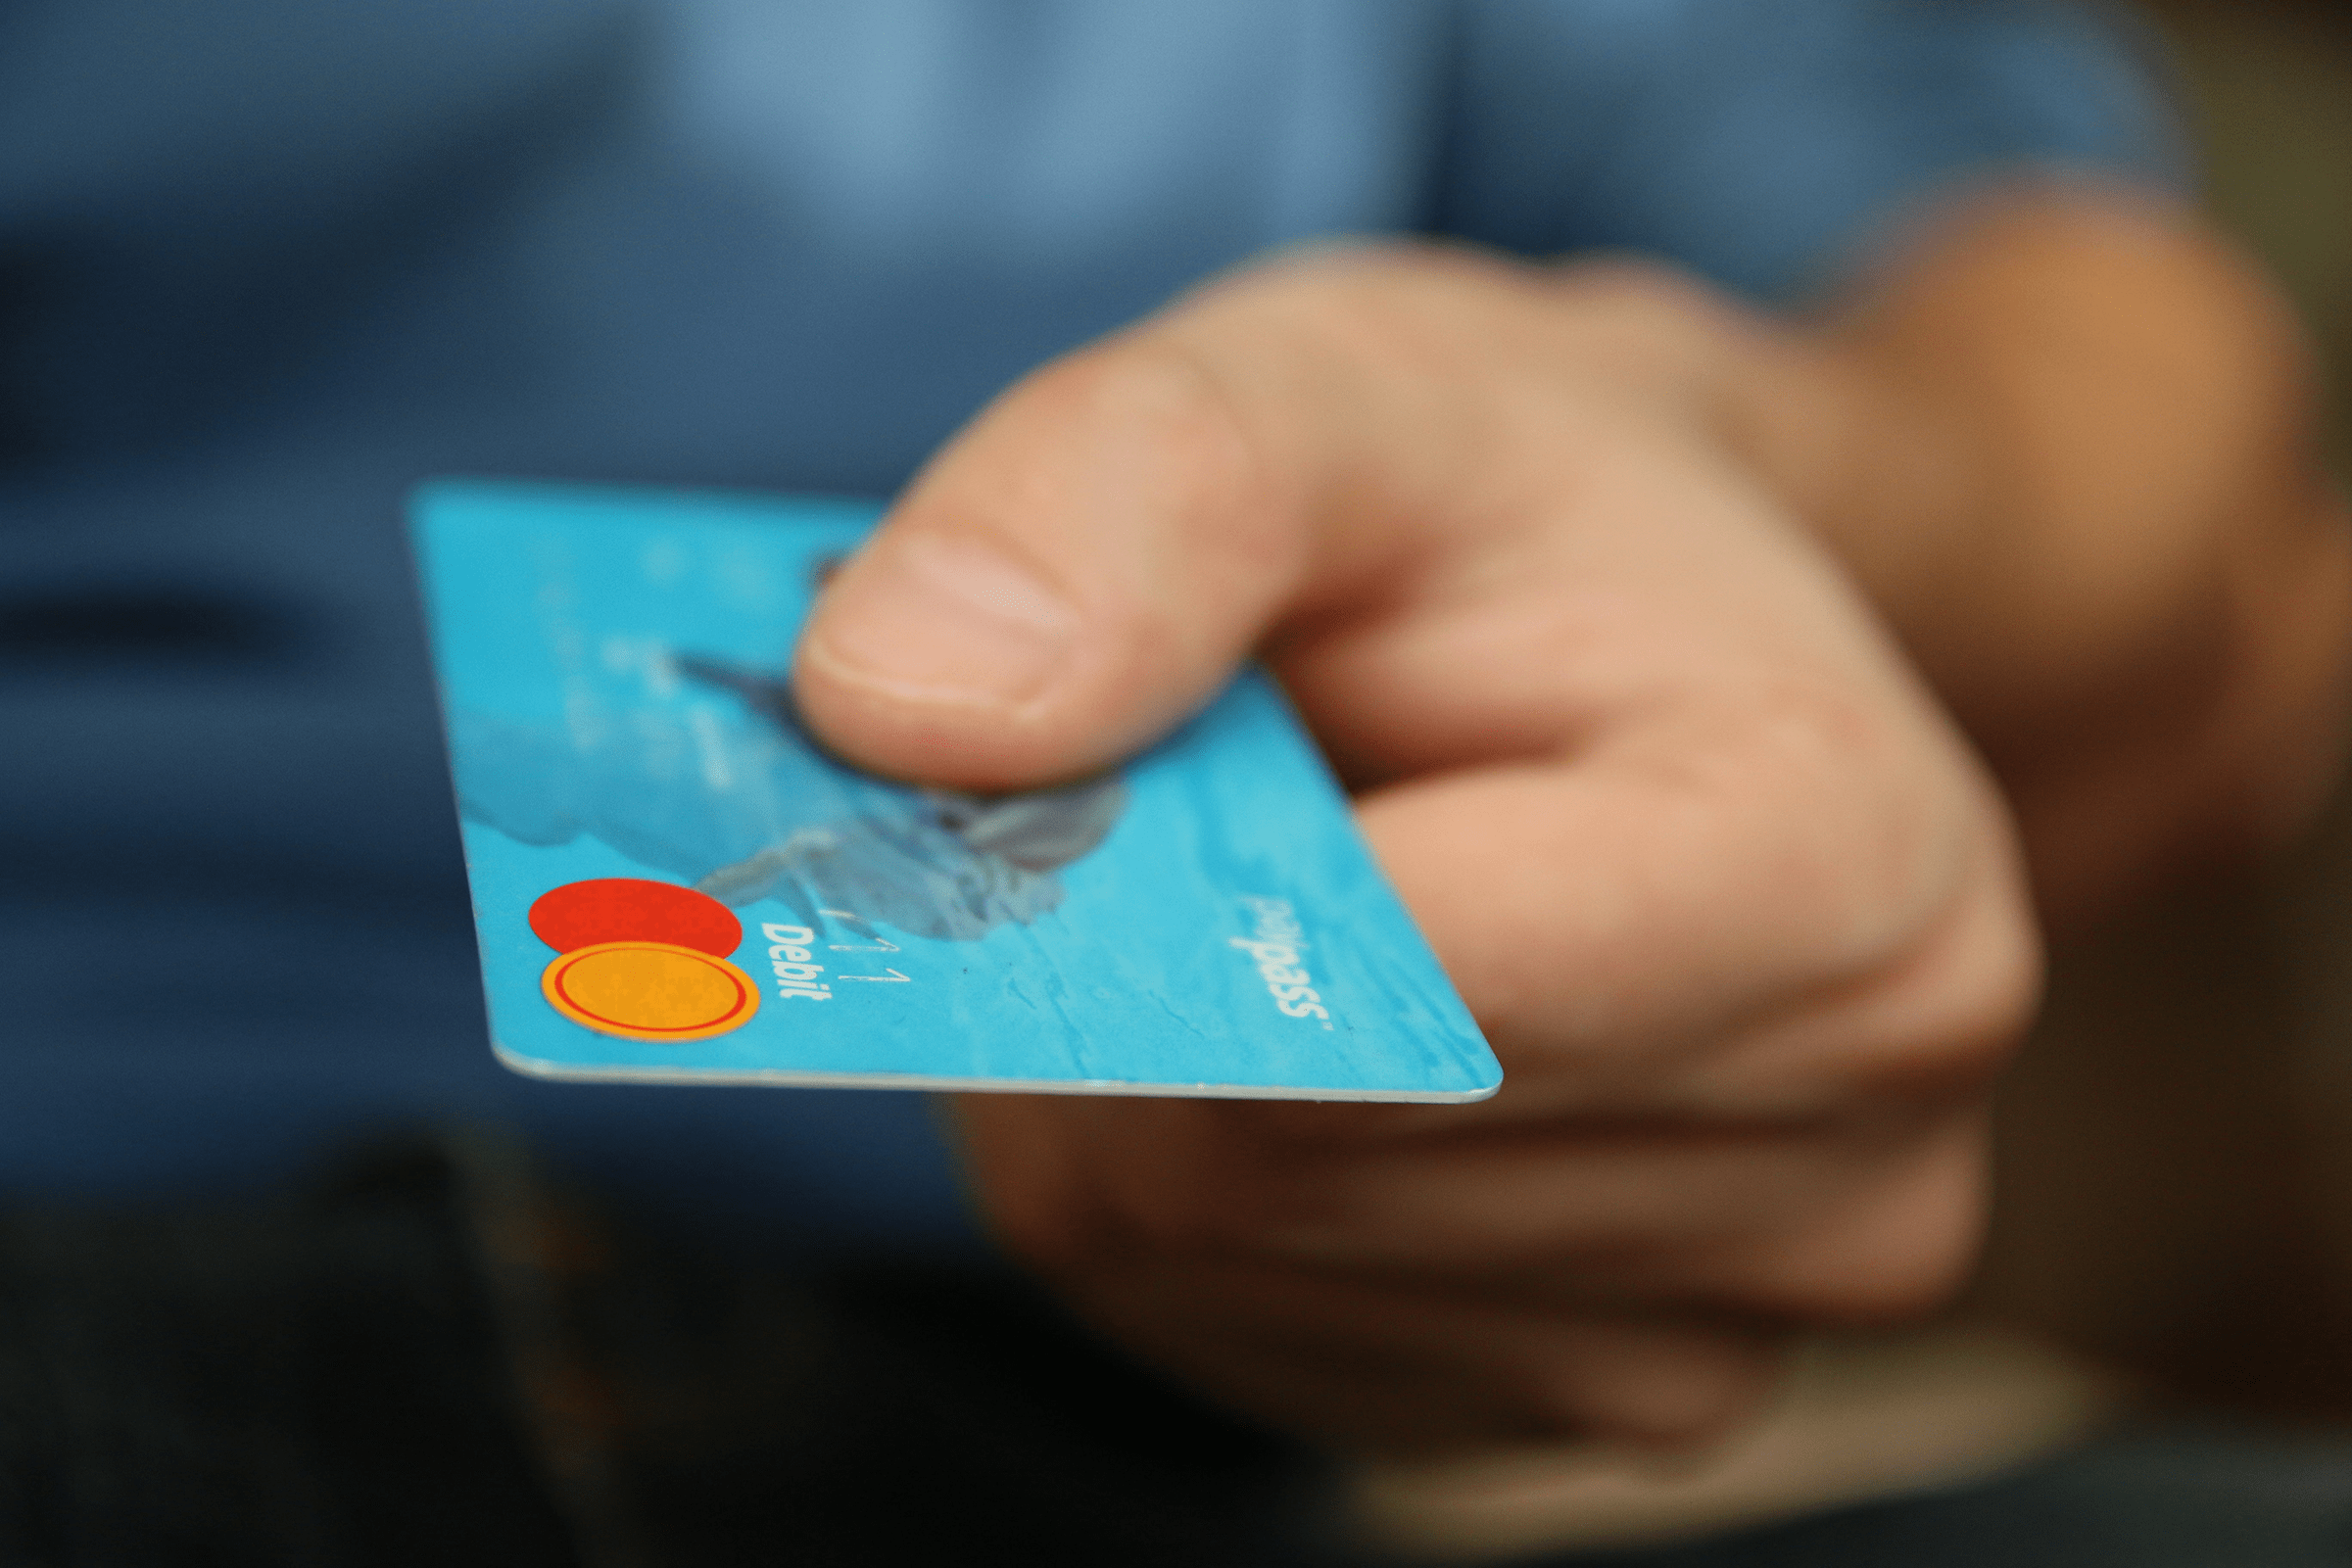 Close-up of hand using credit card